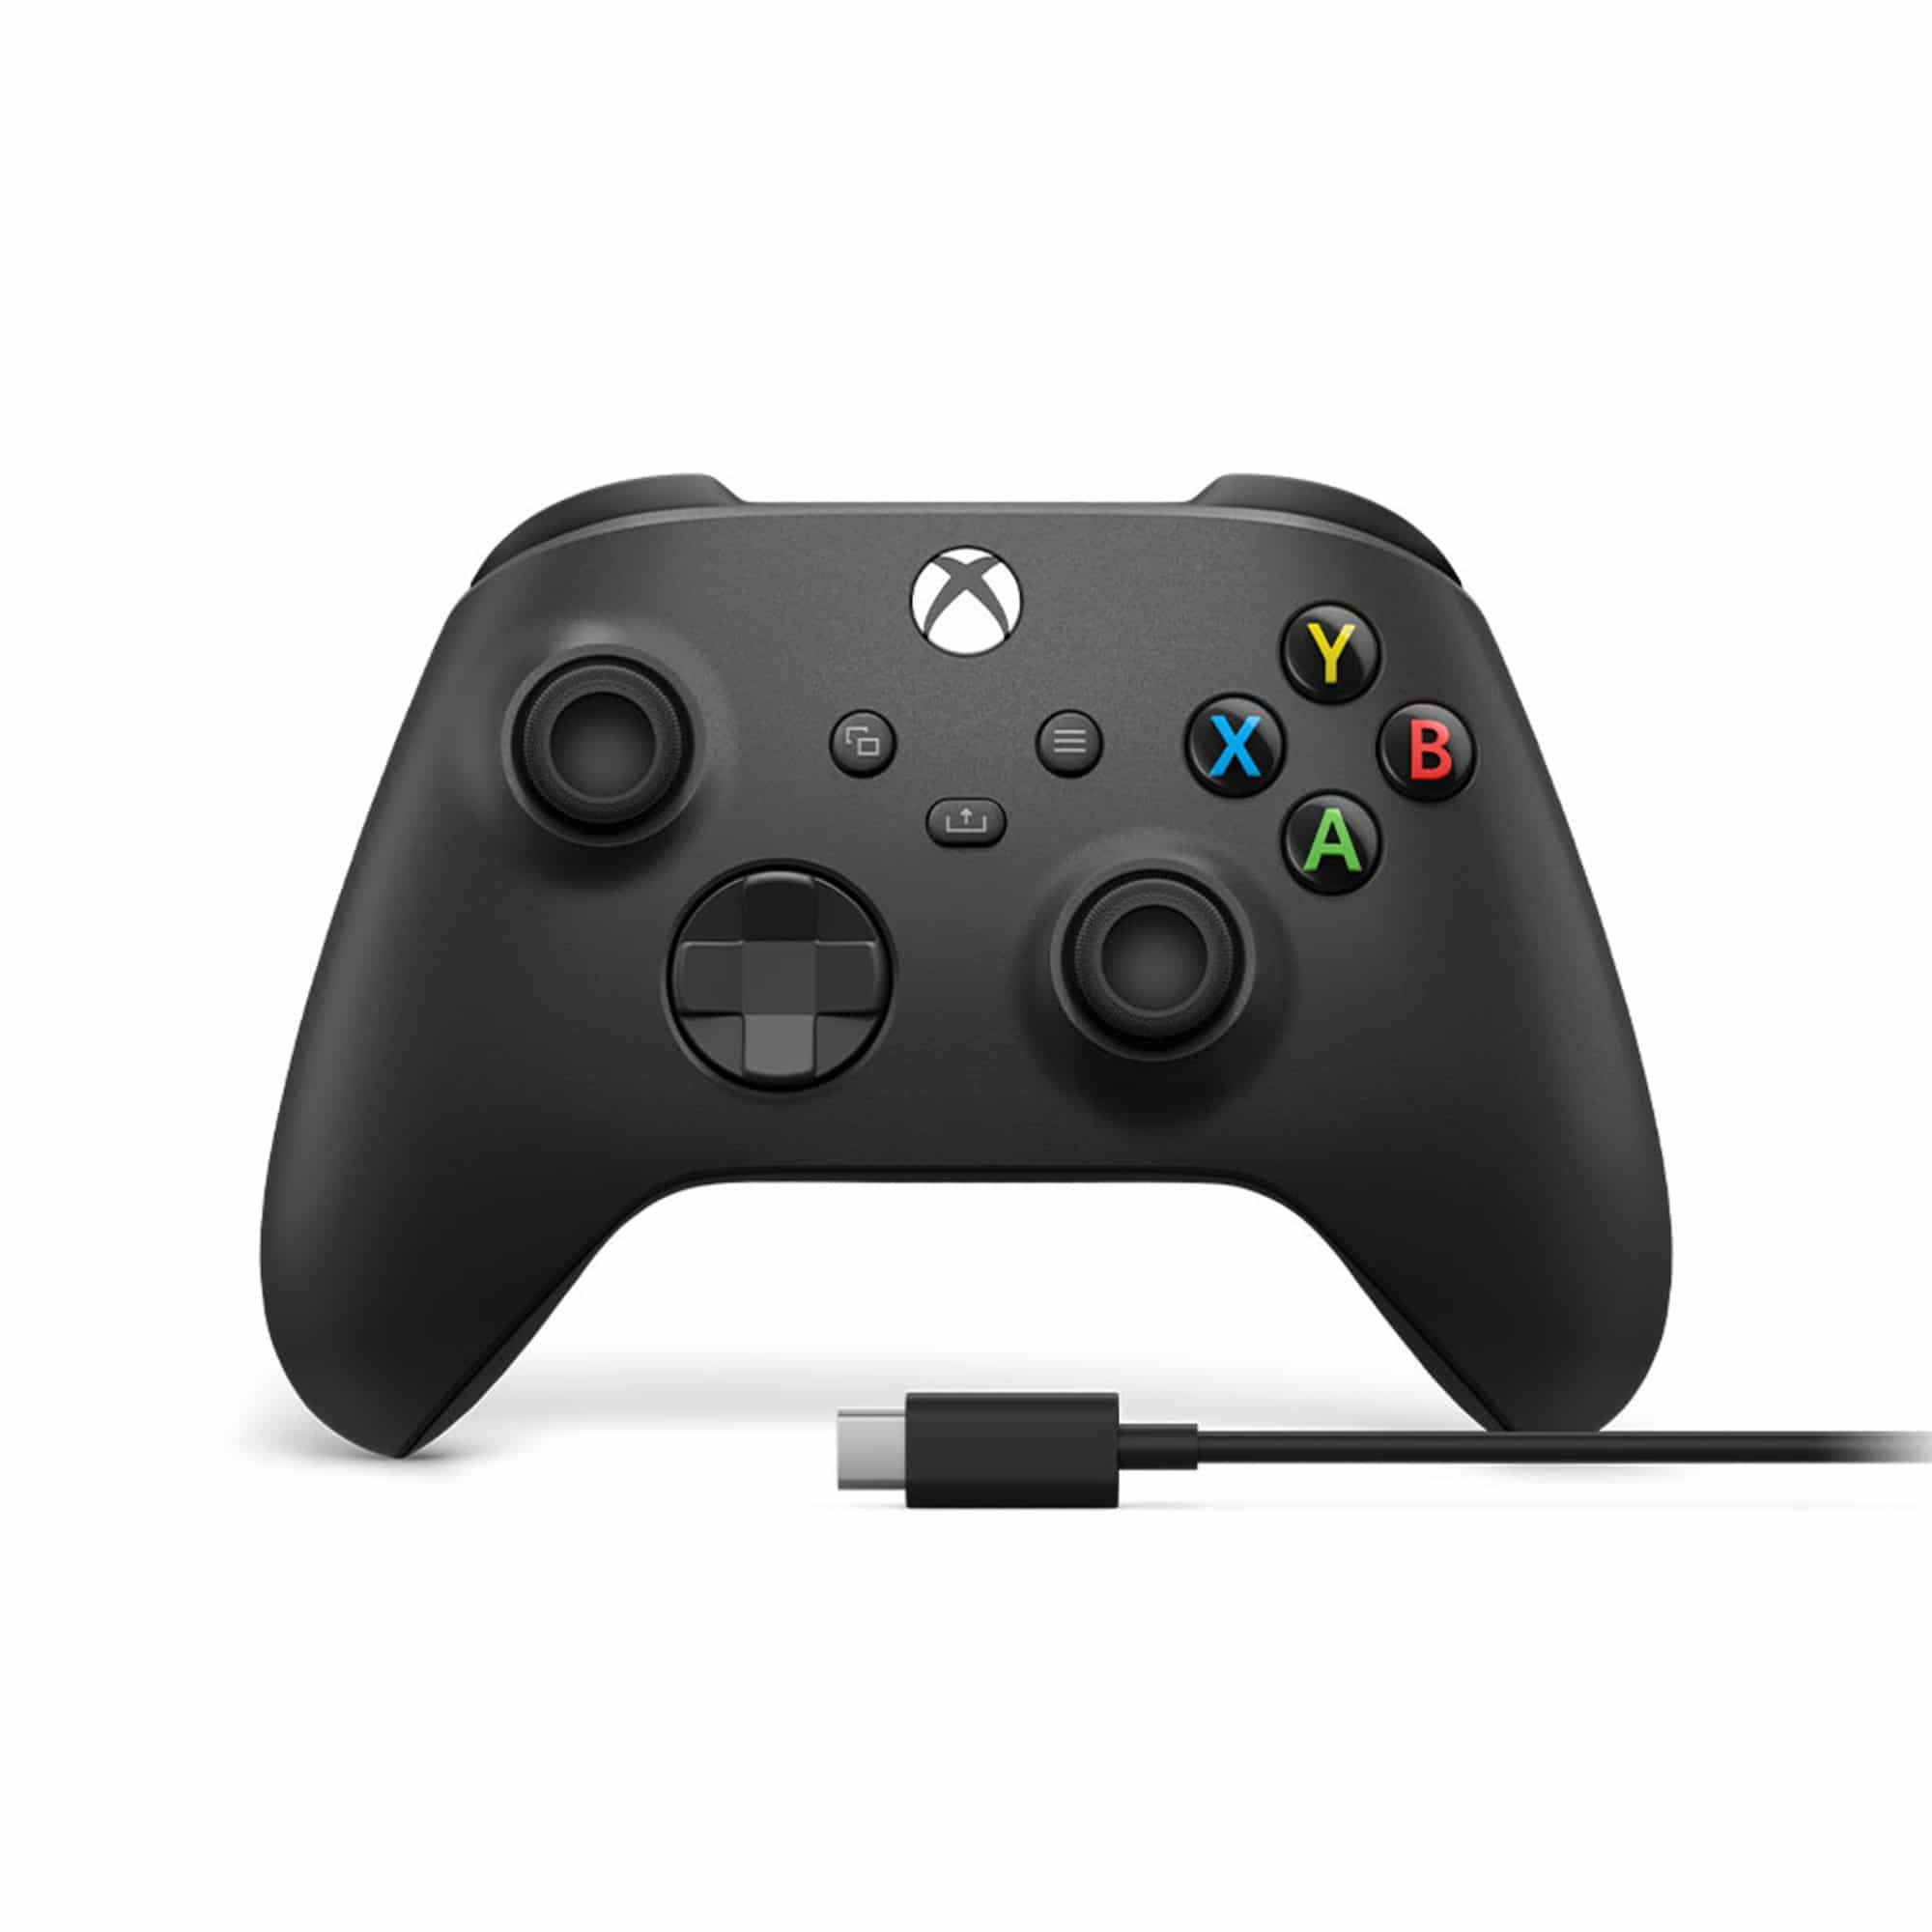 Microsoft Xbox Series Wireless Gaming Controller With Cable - Carbon Black